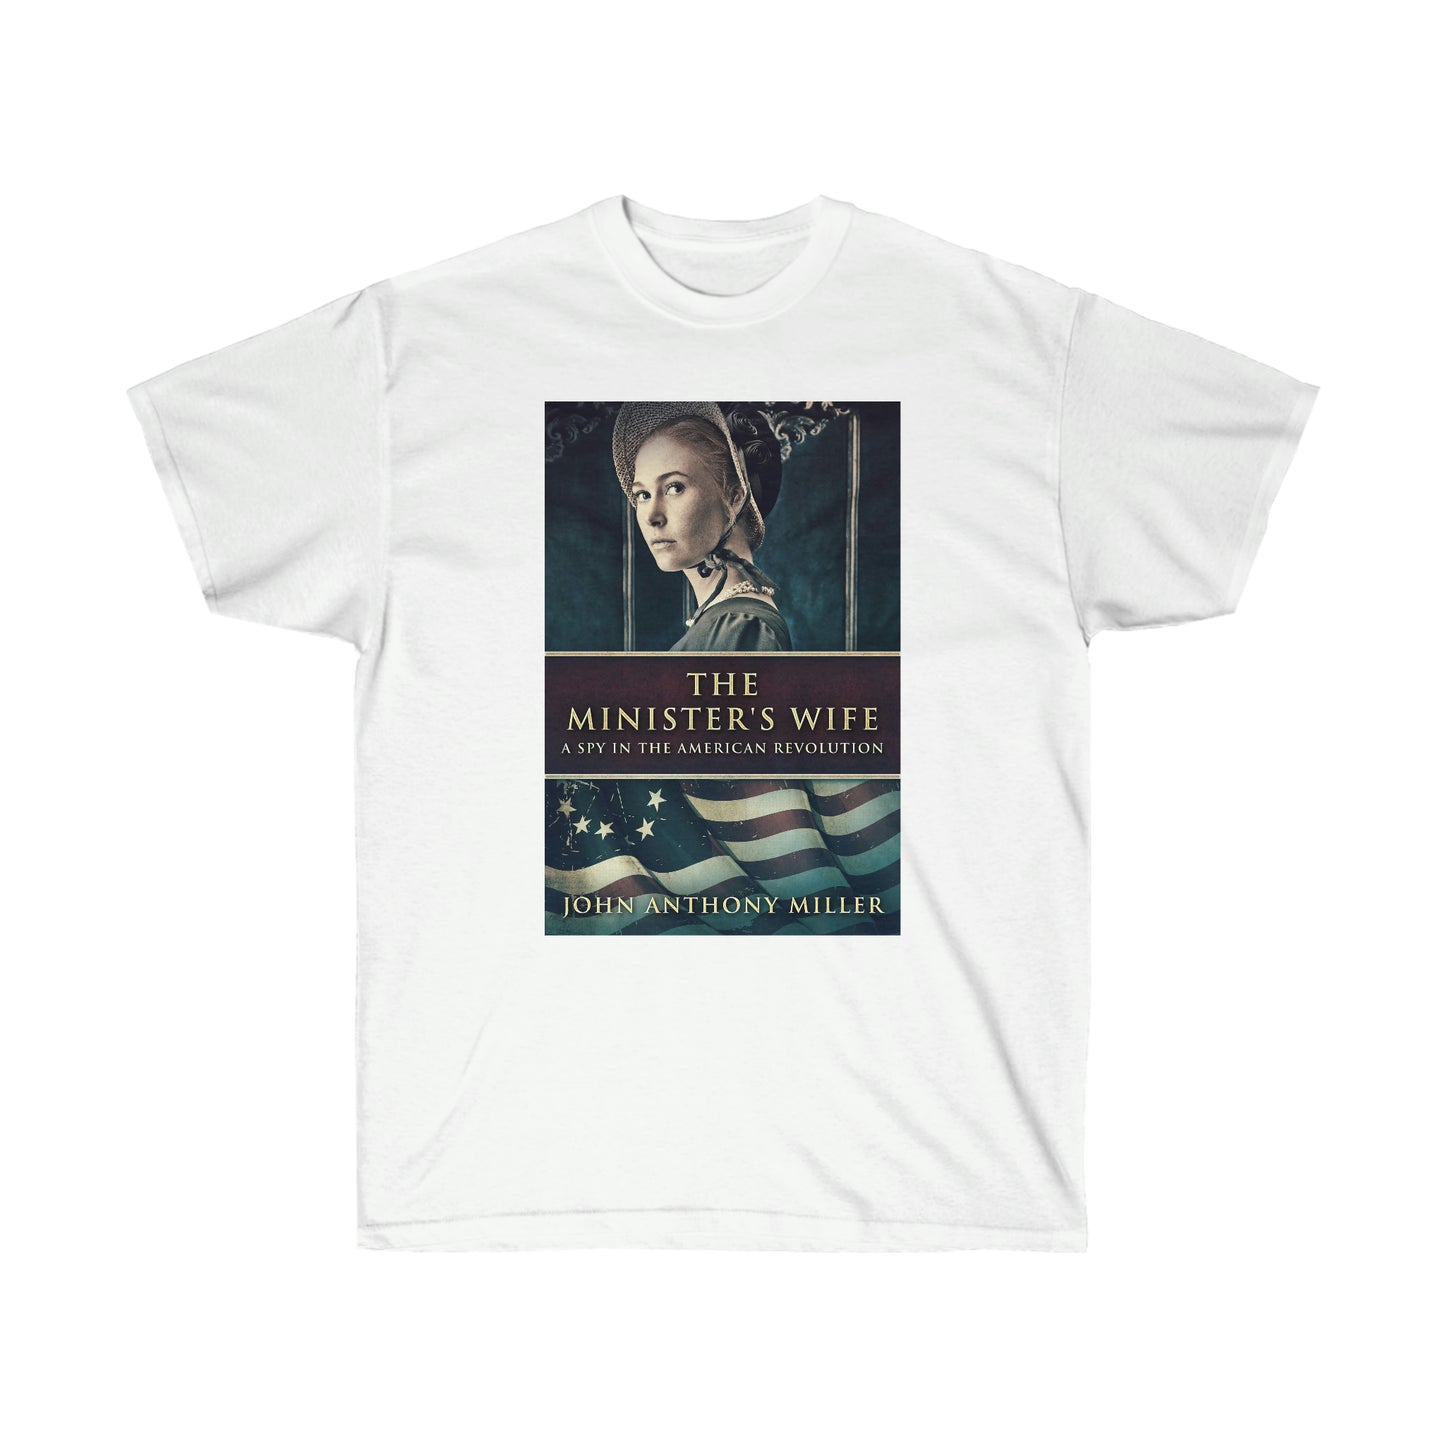 The Minister's Wife - Unisex T-Shirt